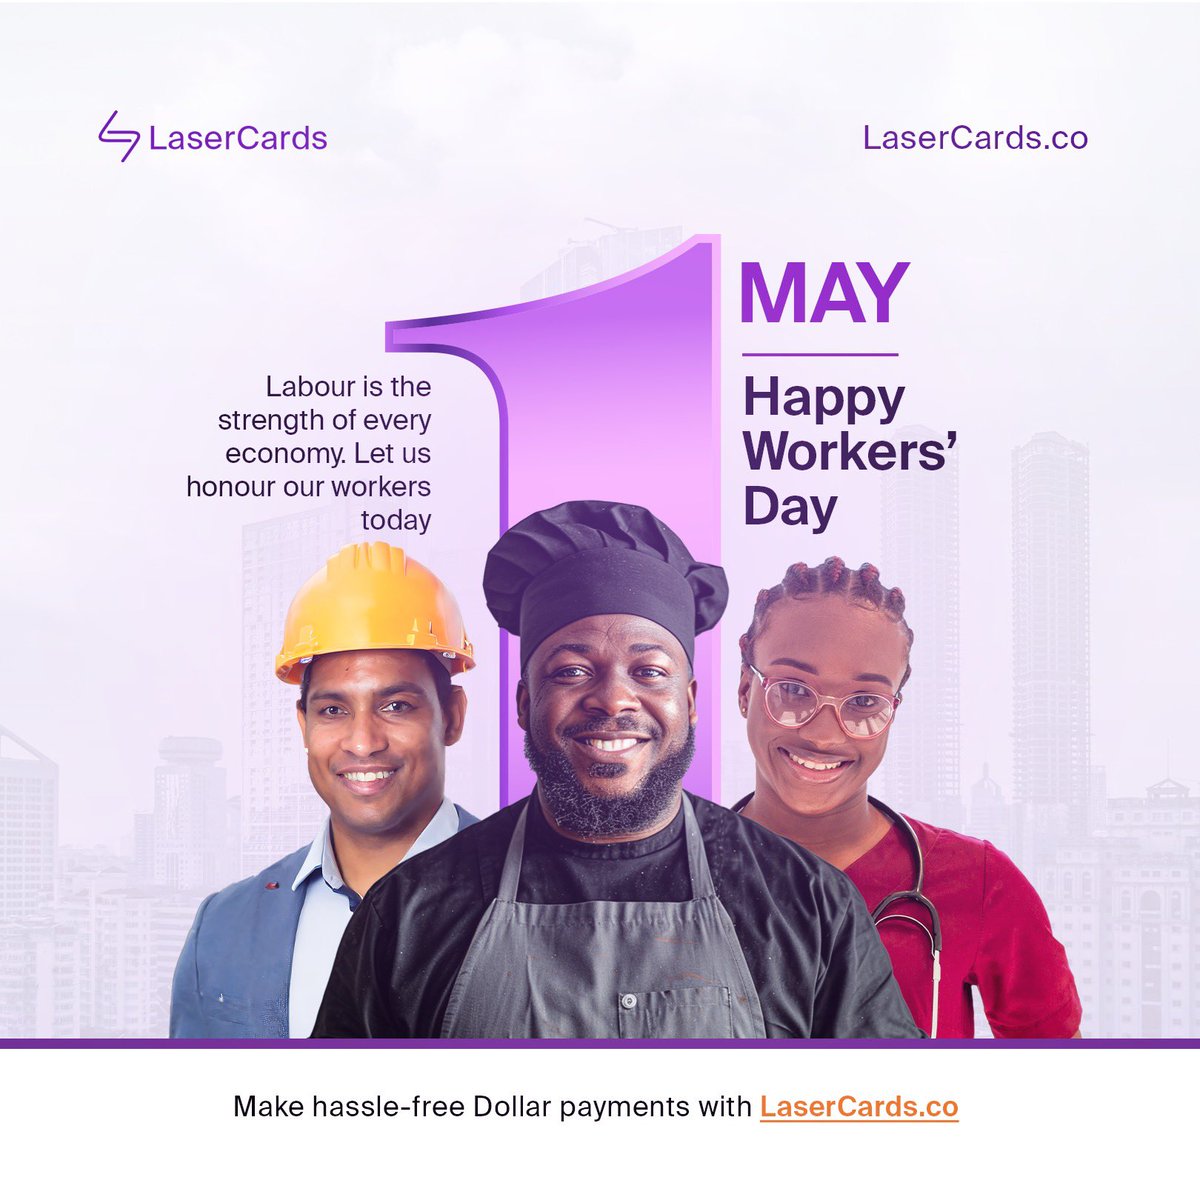 Happy Worker’s Day. 💜

#LaserCardsCo #LaserCards #VirtualDollarCards #VirtualPayments #OnlinePayments #DollarCards